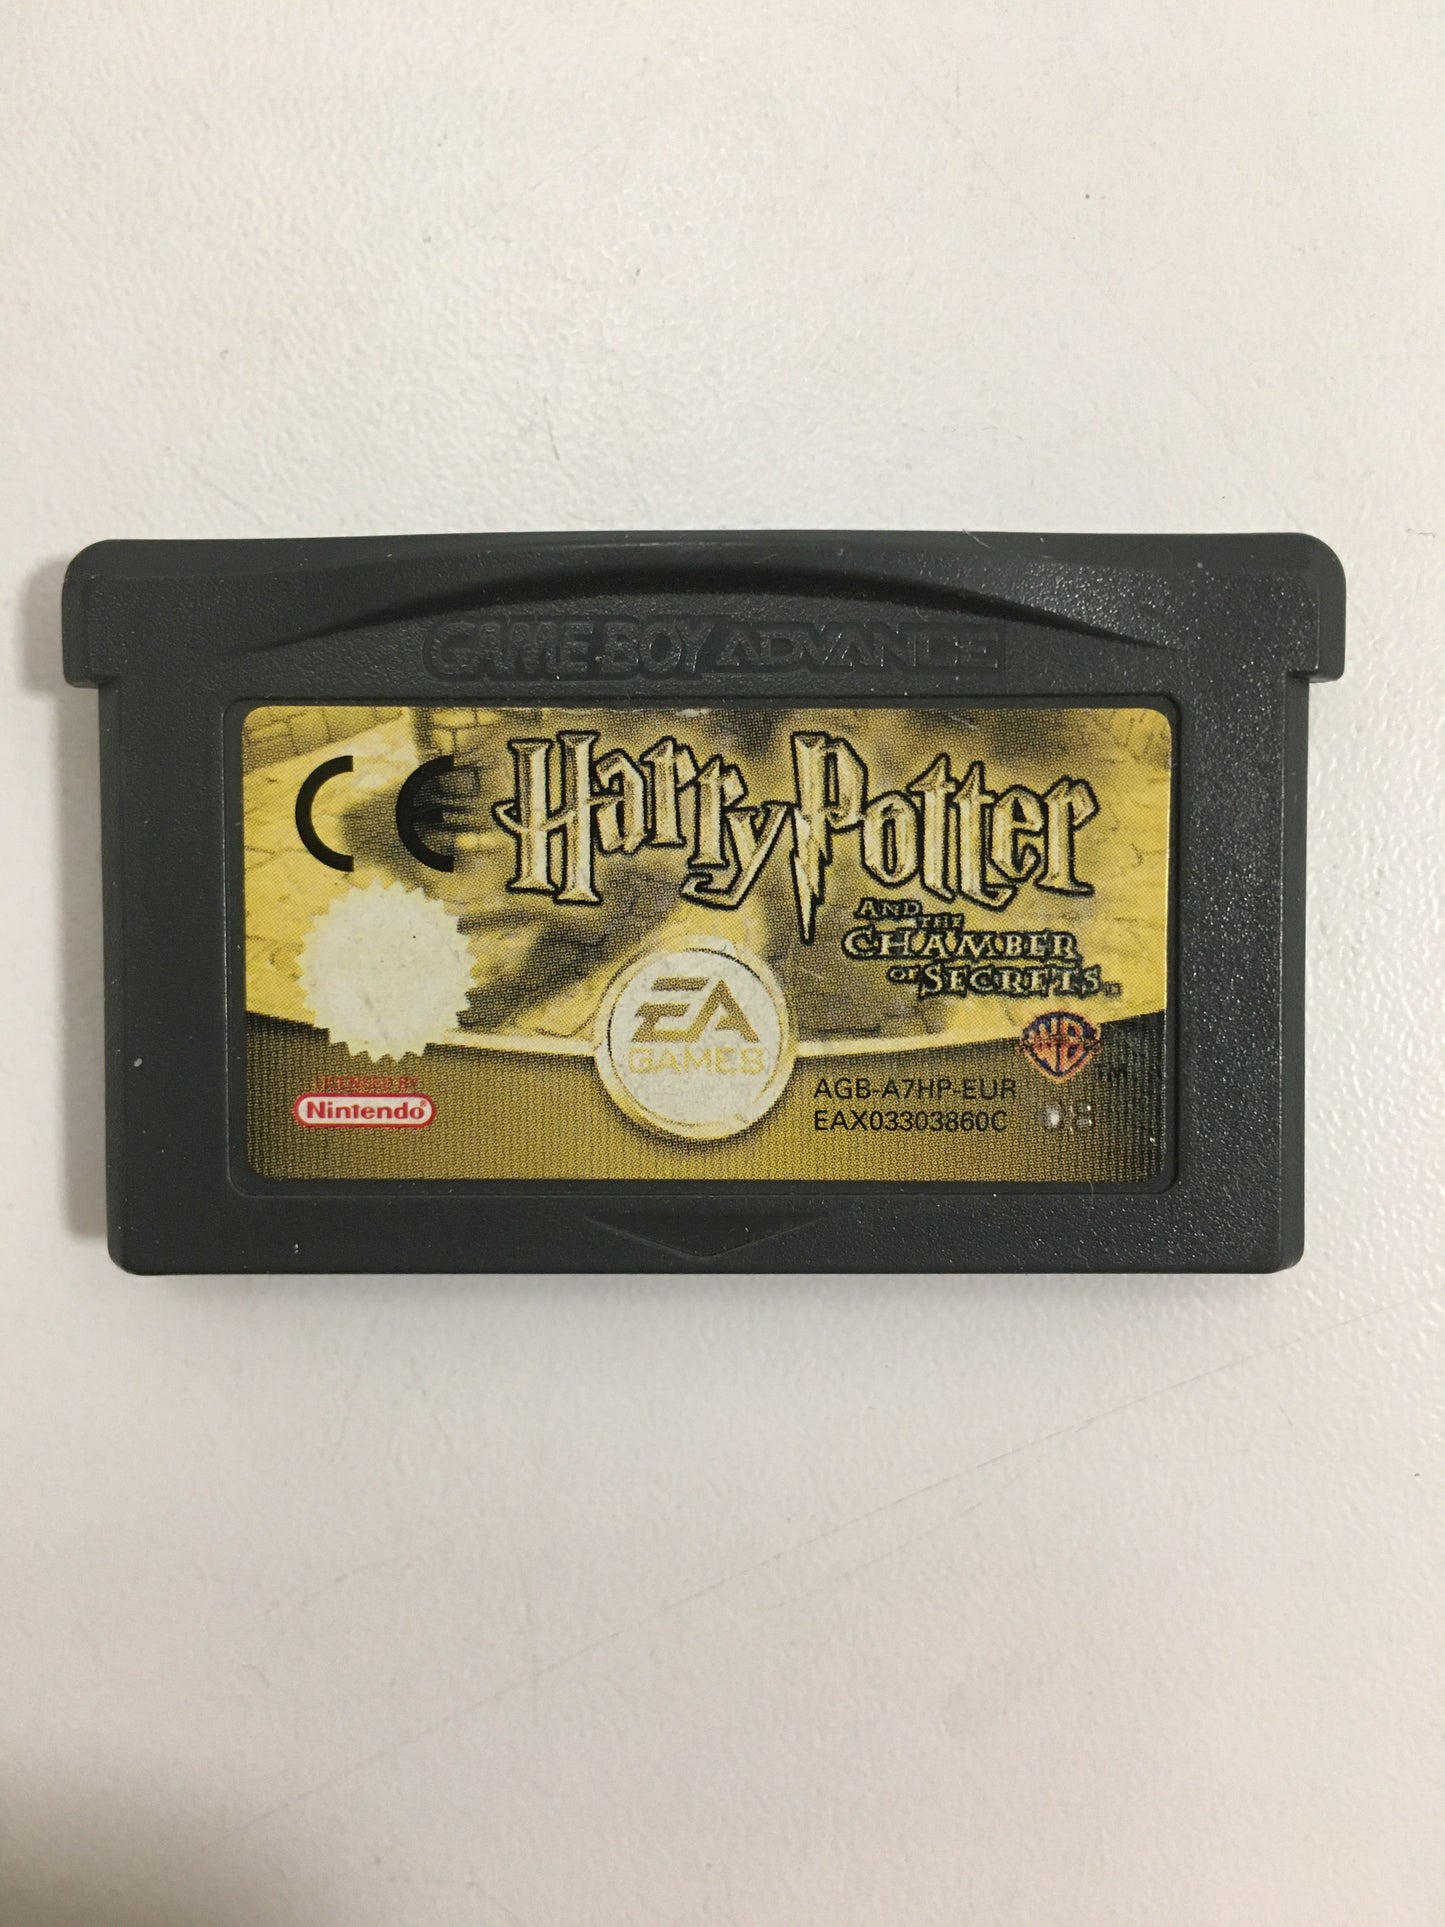 Harry potter and the chamber of secrets Nintendo Game boy advance